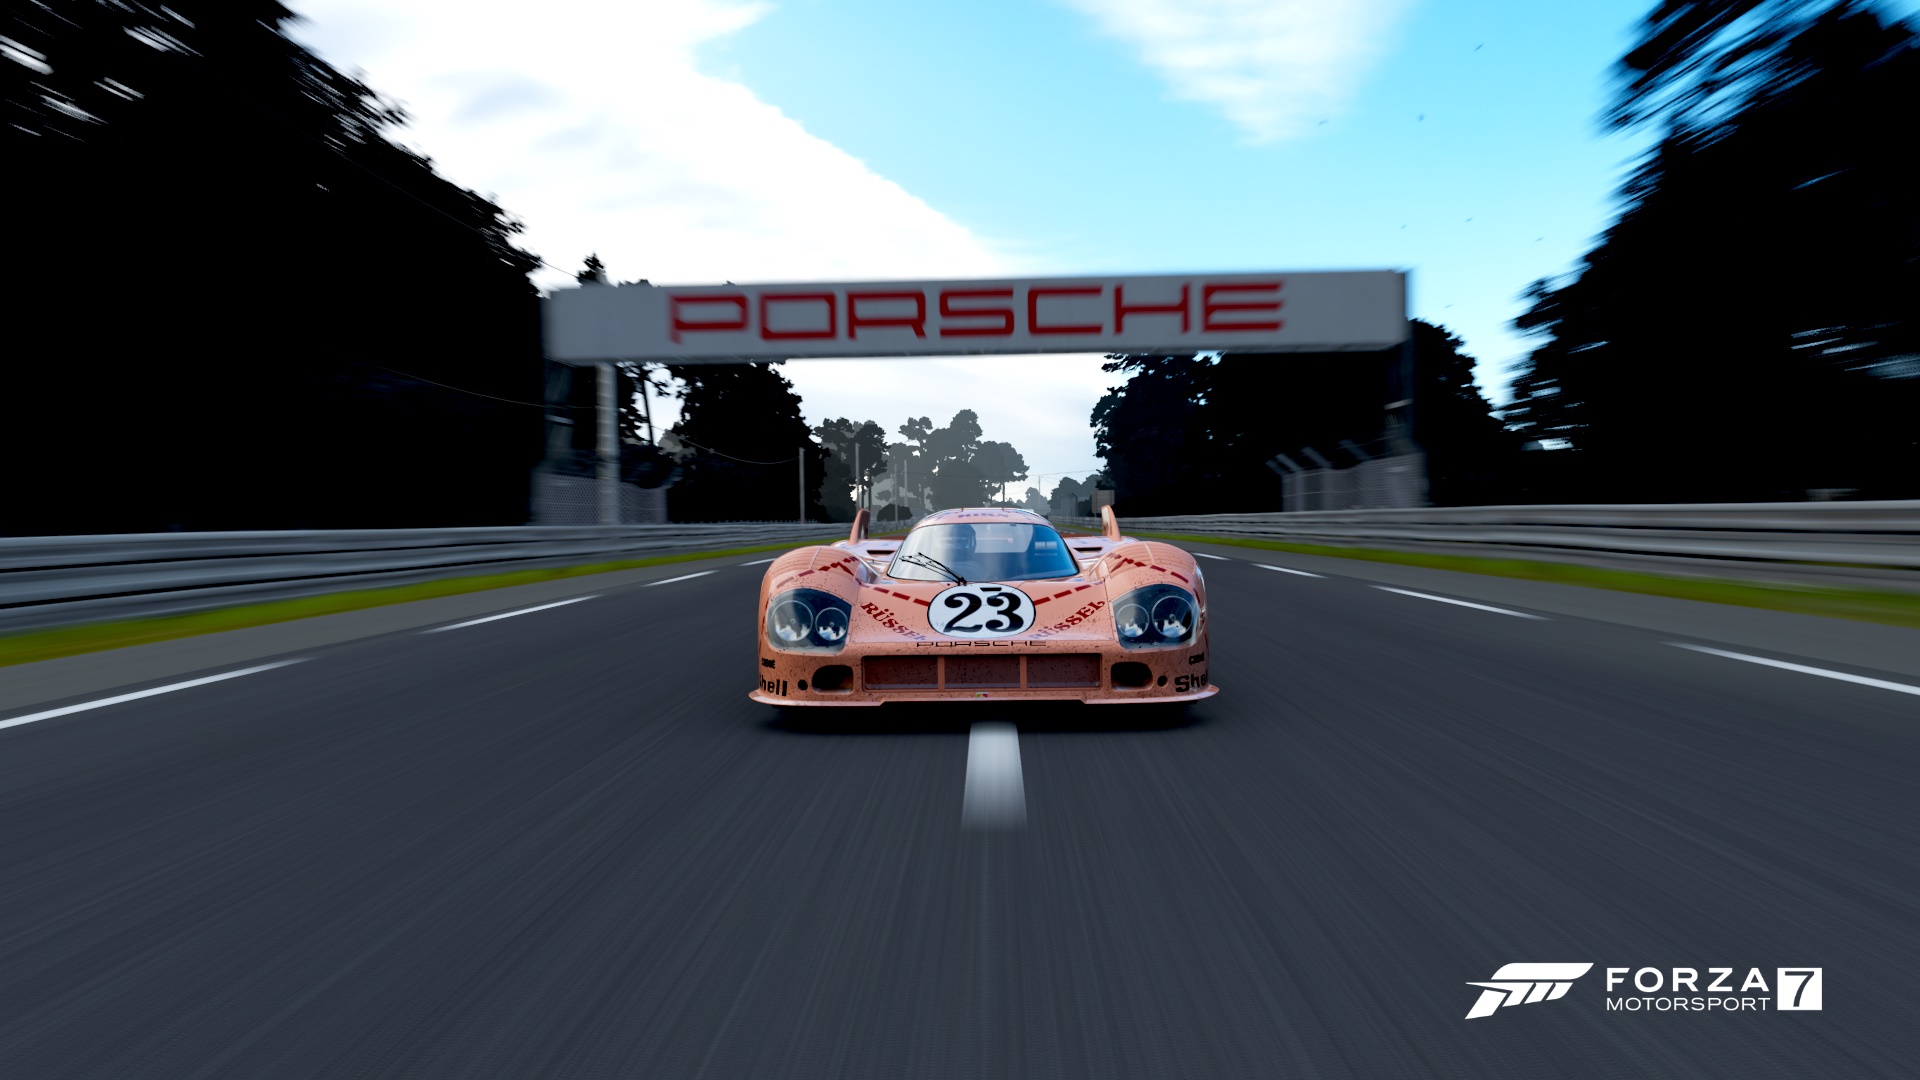 General 1920x1080 Forza Porsche Forza Motorsport 7 car race cars frontal view Turn 10 Studios pink cars vehicle video games racing